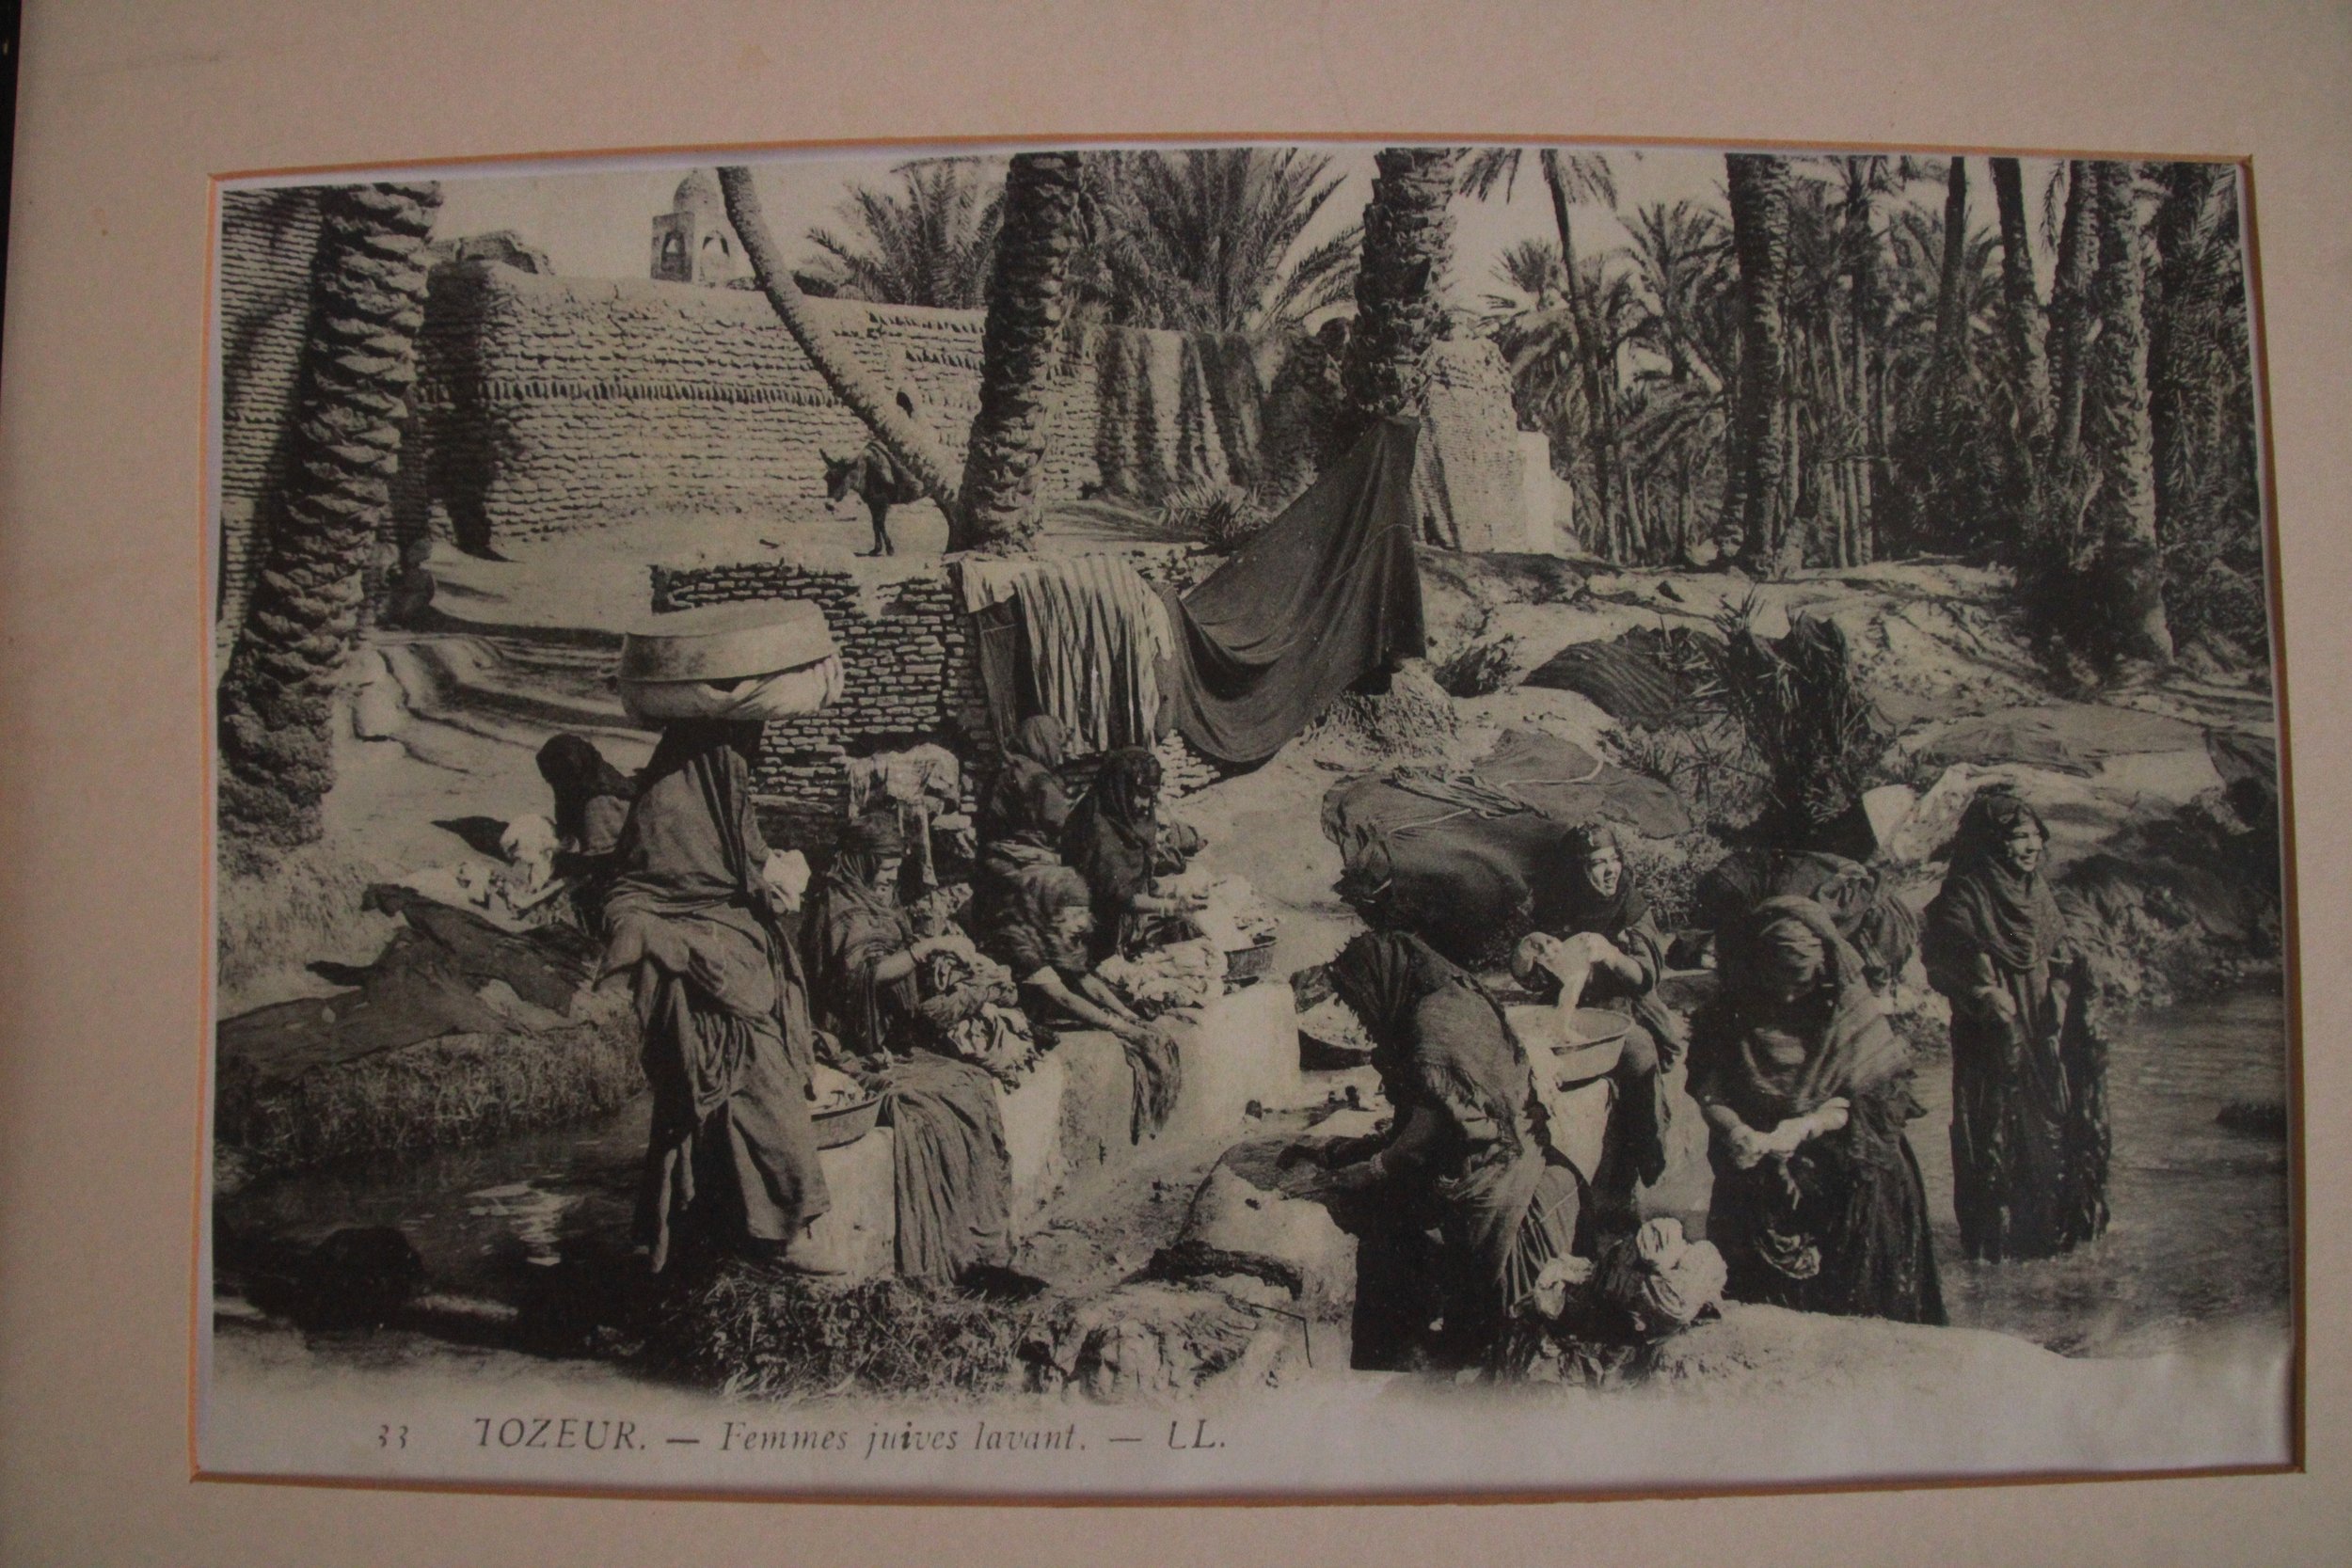  PICTURED: Women washing camel wool in the oasis from the 19th century. 